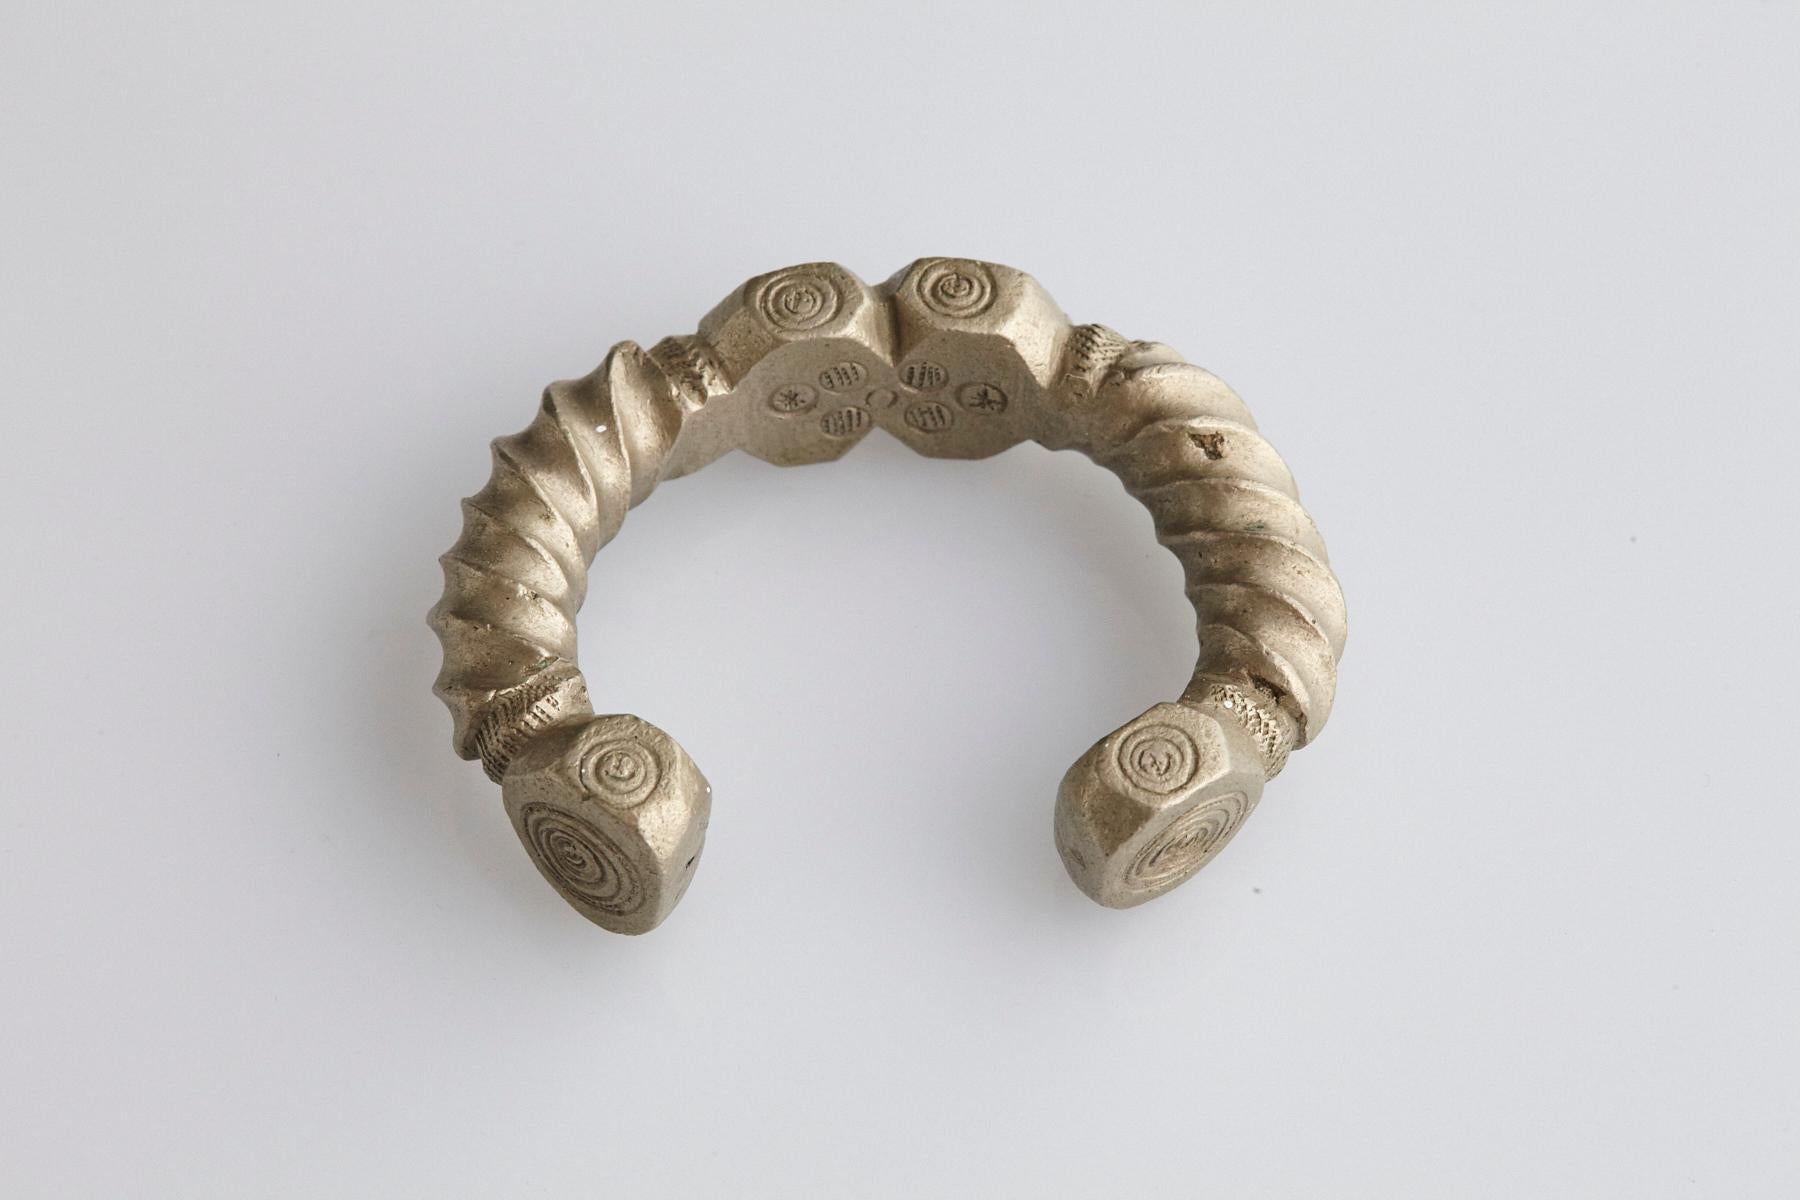 Early 20th-century brass or copper alloy with higher nickel content. Bracelet in horseshoe form with fixed opening. Turned design with rectangular shapes and carved swirling patterns. Nupe People, Nigeria.
148,00 gr / 5.25 oz. Opening 3.0 cm.
The